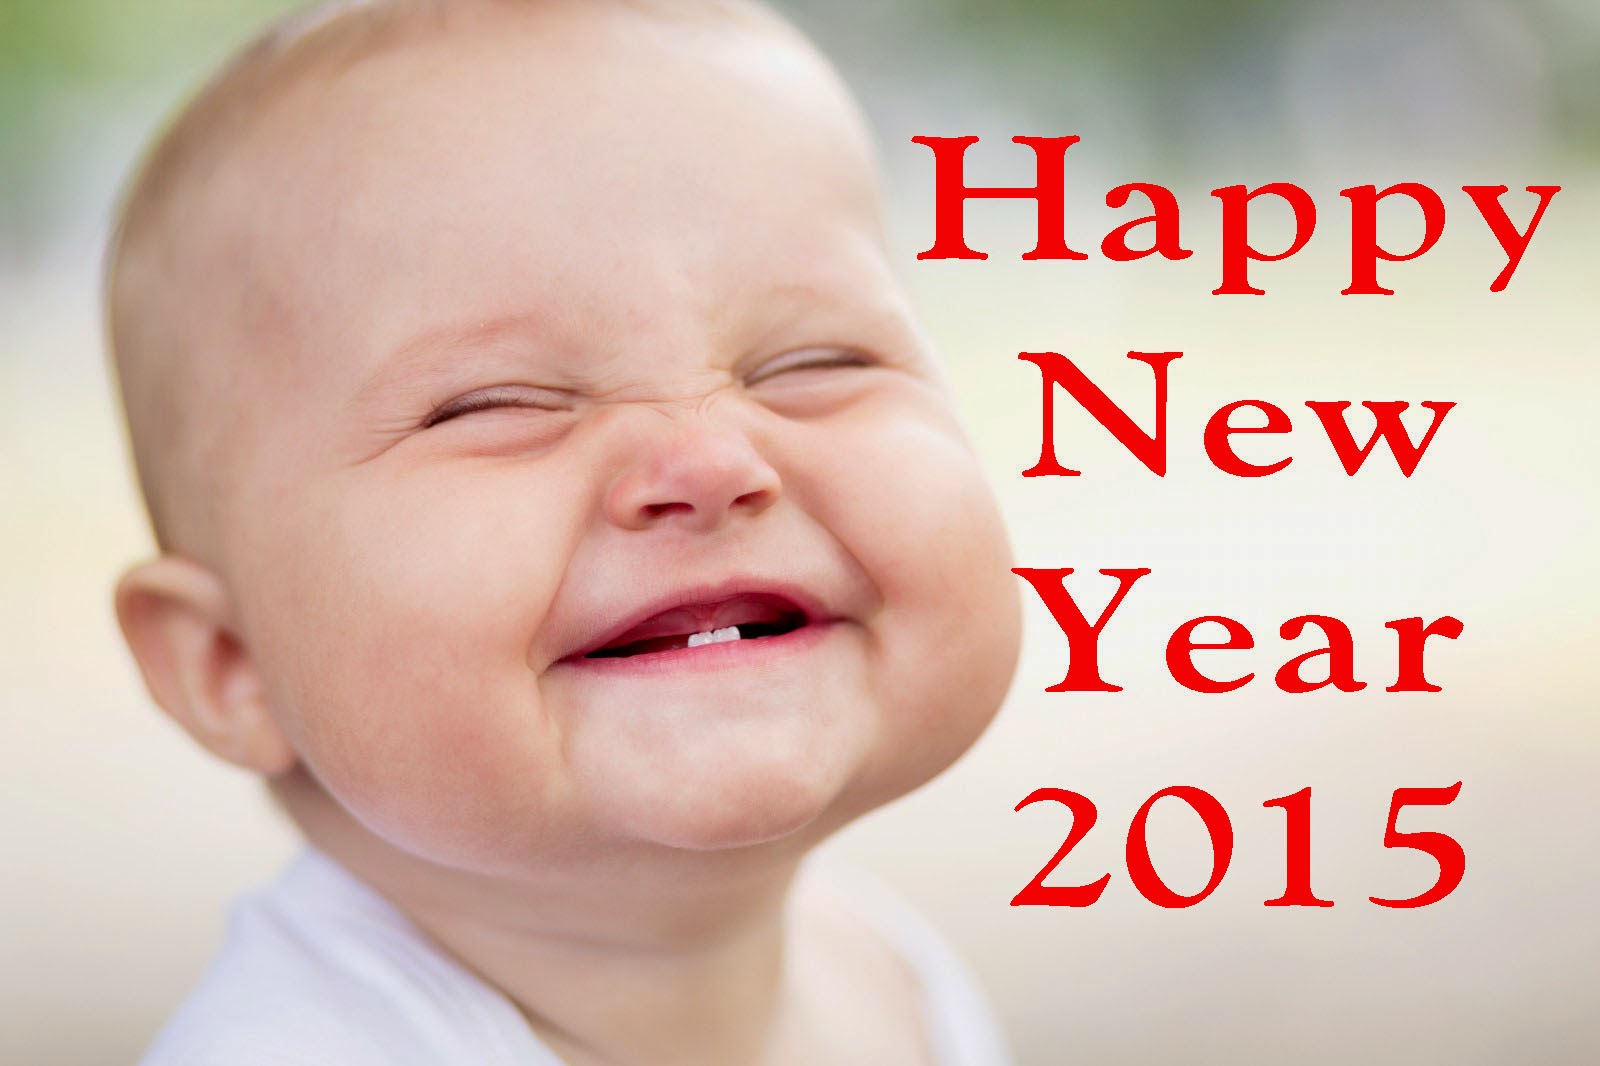 Smiling Cute Babies HD Wallpaper Of New Year Happy